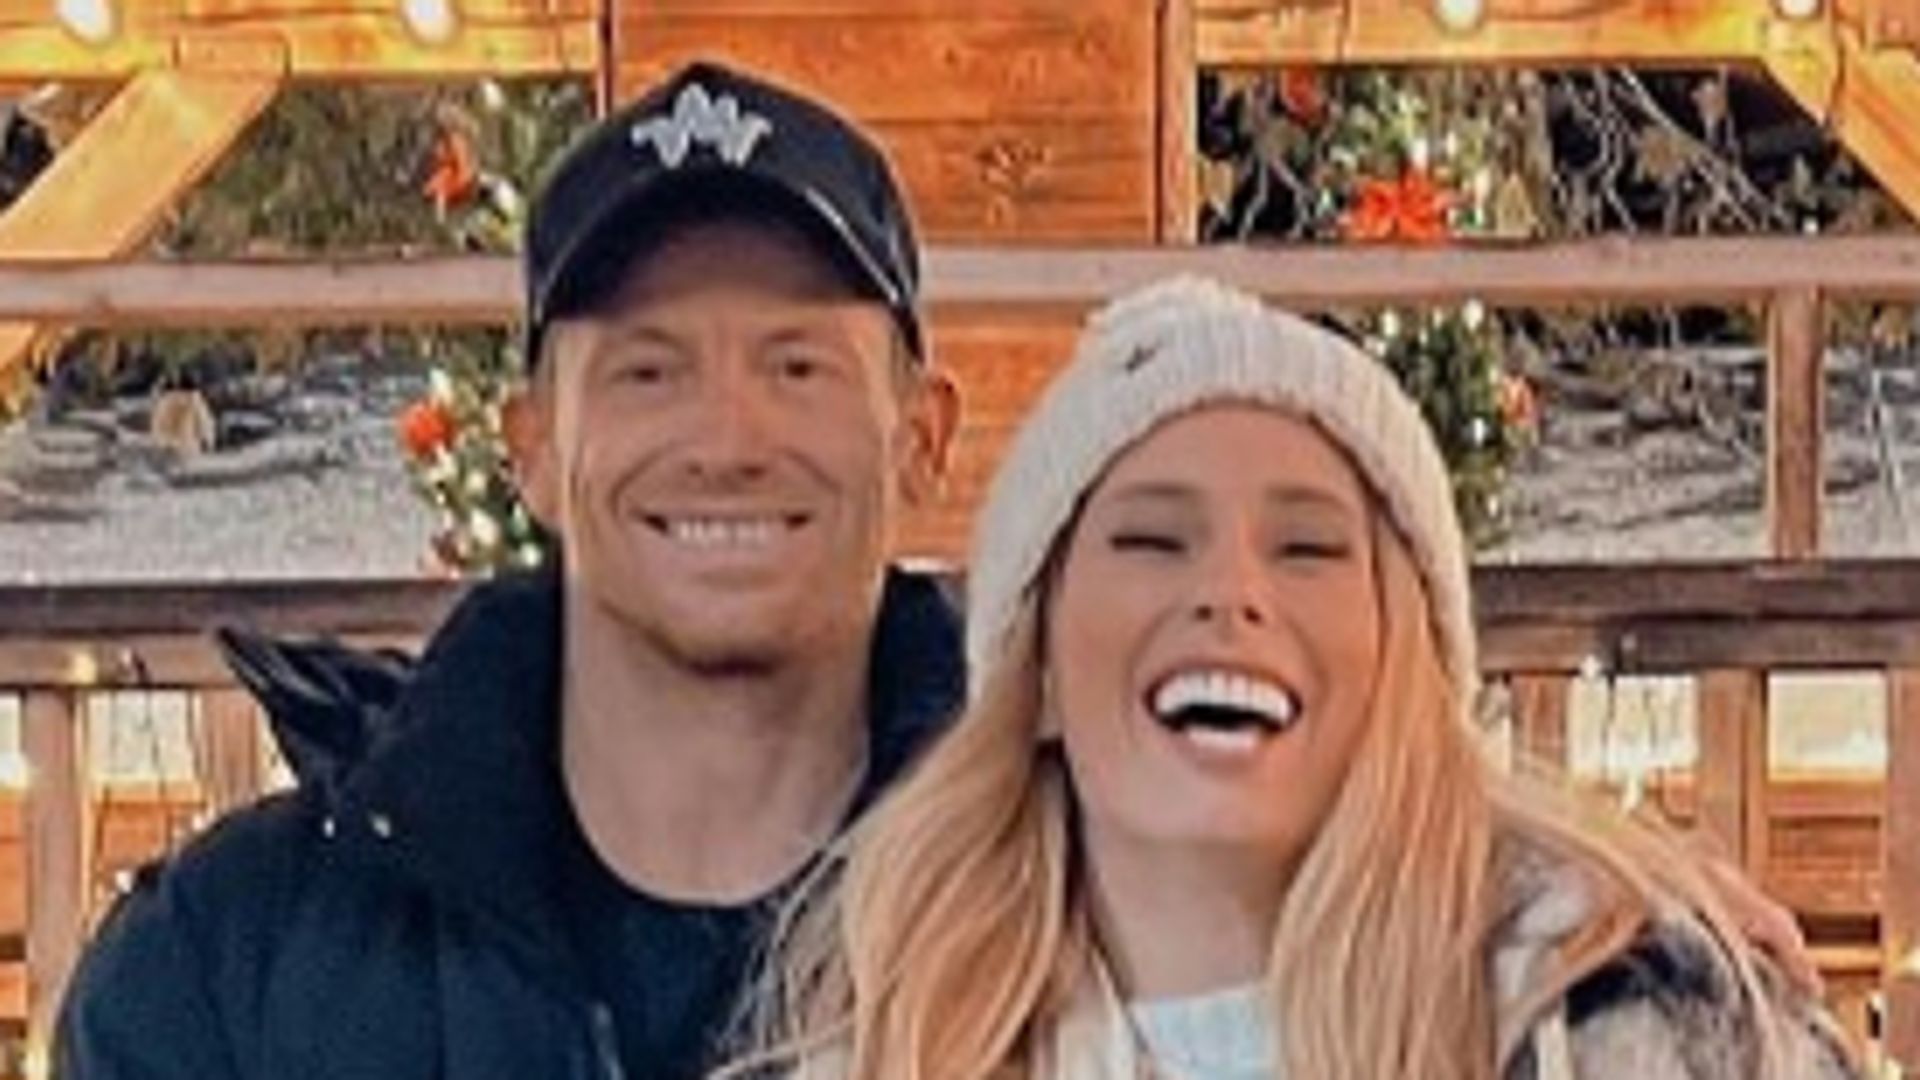 Stacey Solomon and Joe Swash at a Christmas event